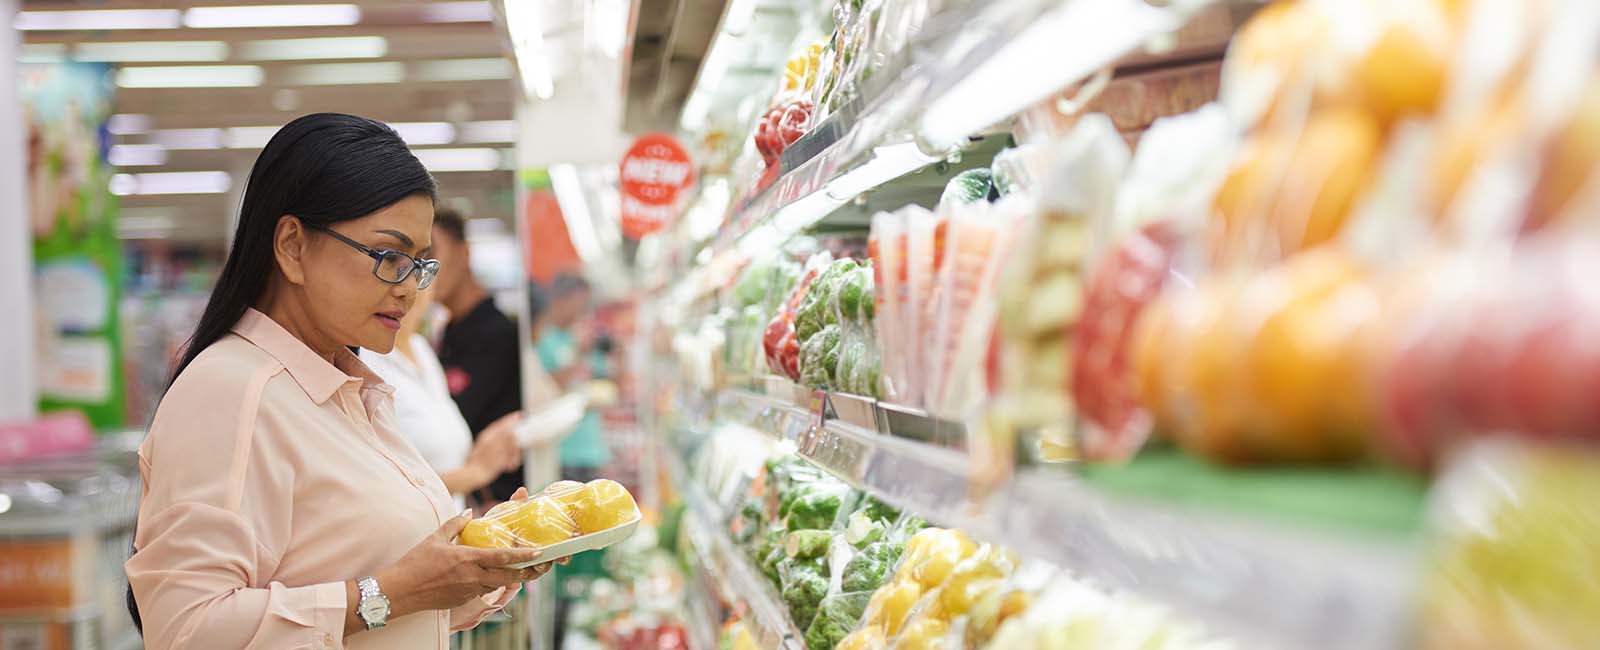 Grocery time? Get healthy foods with your iCare membership!